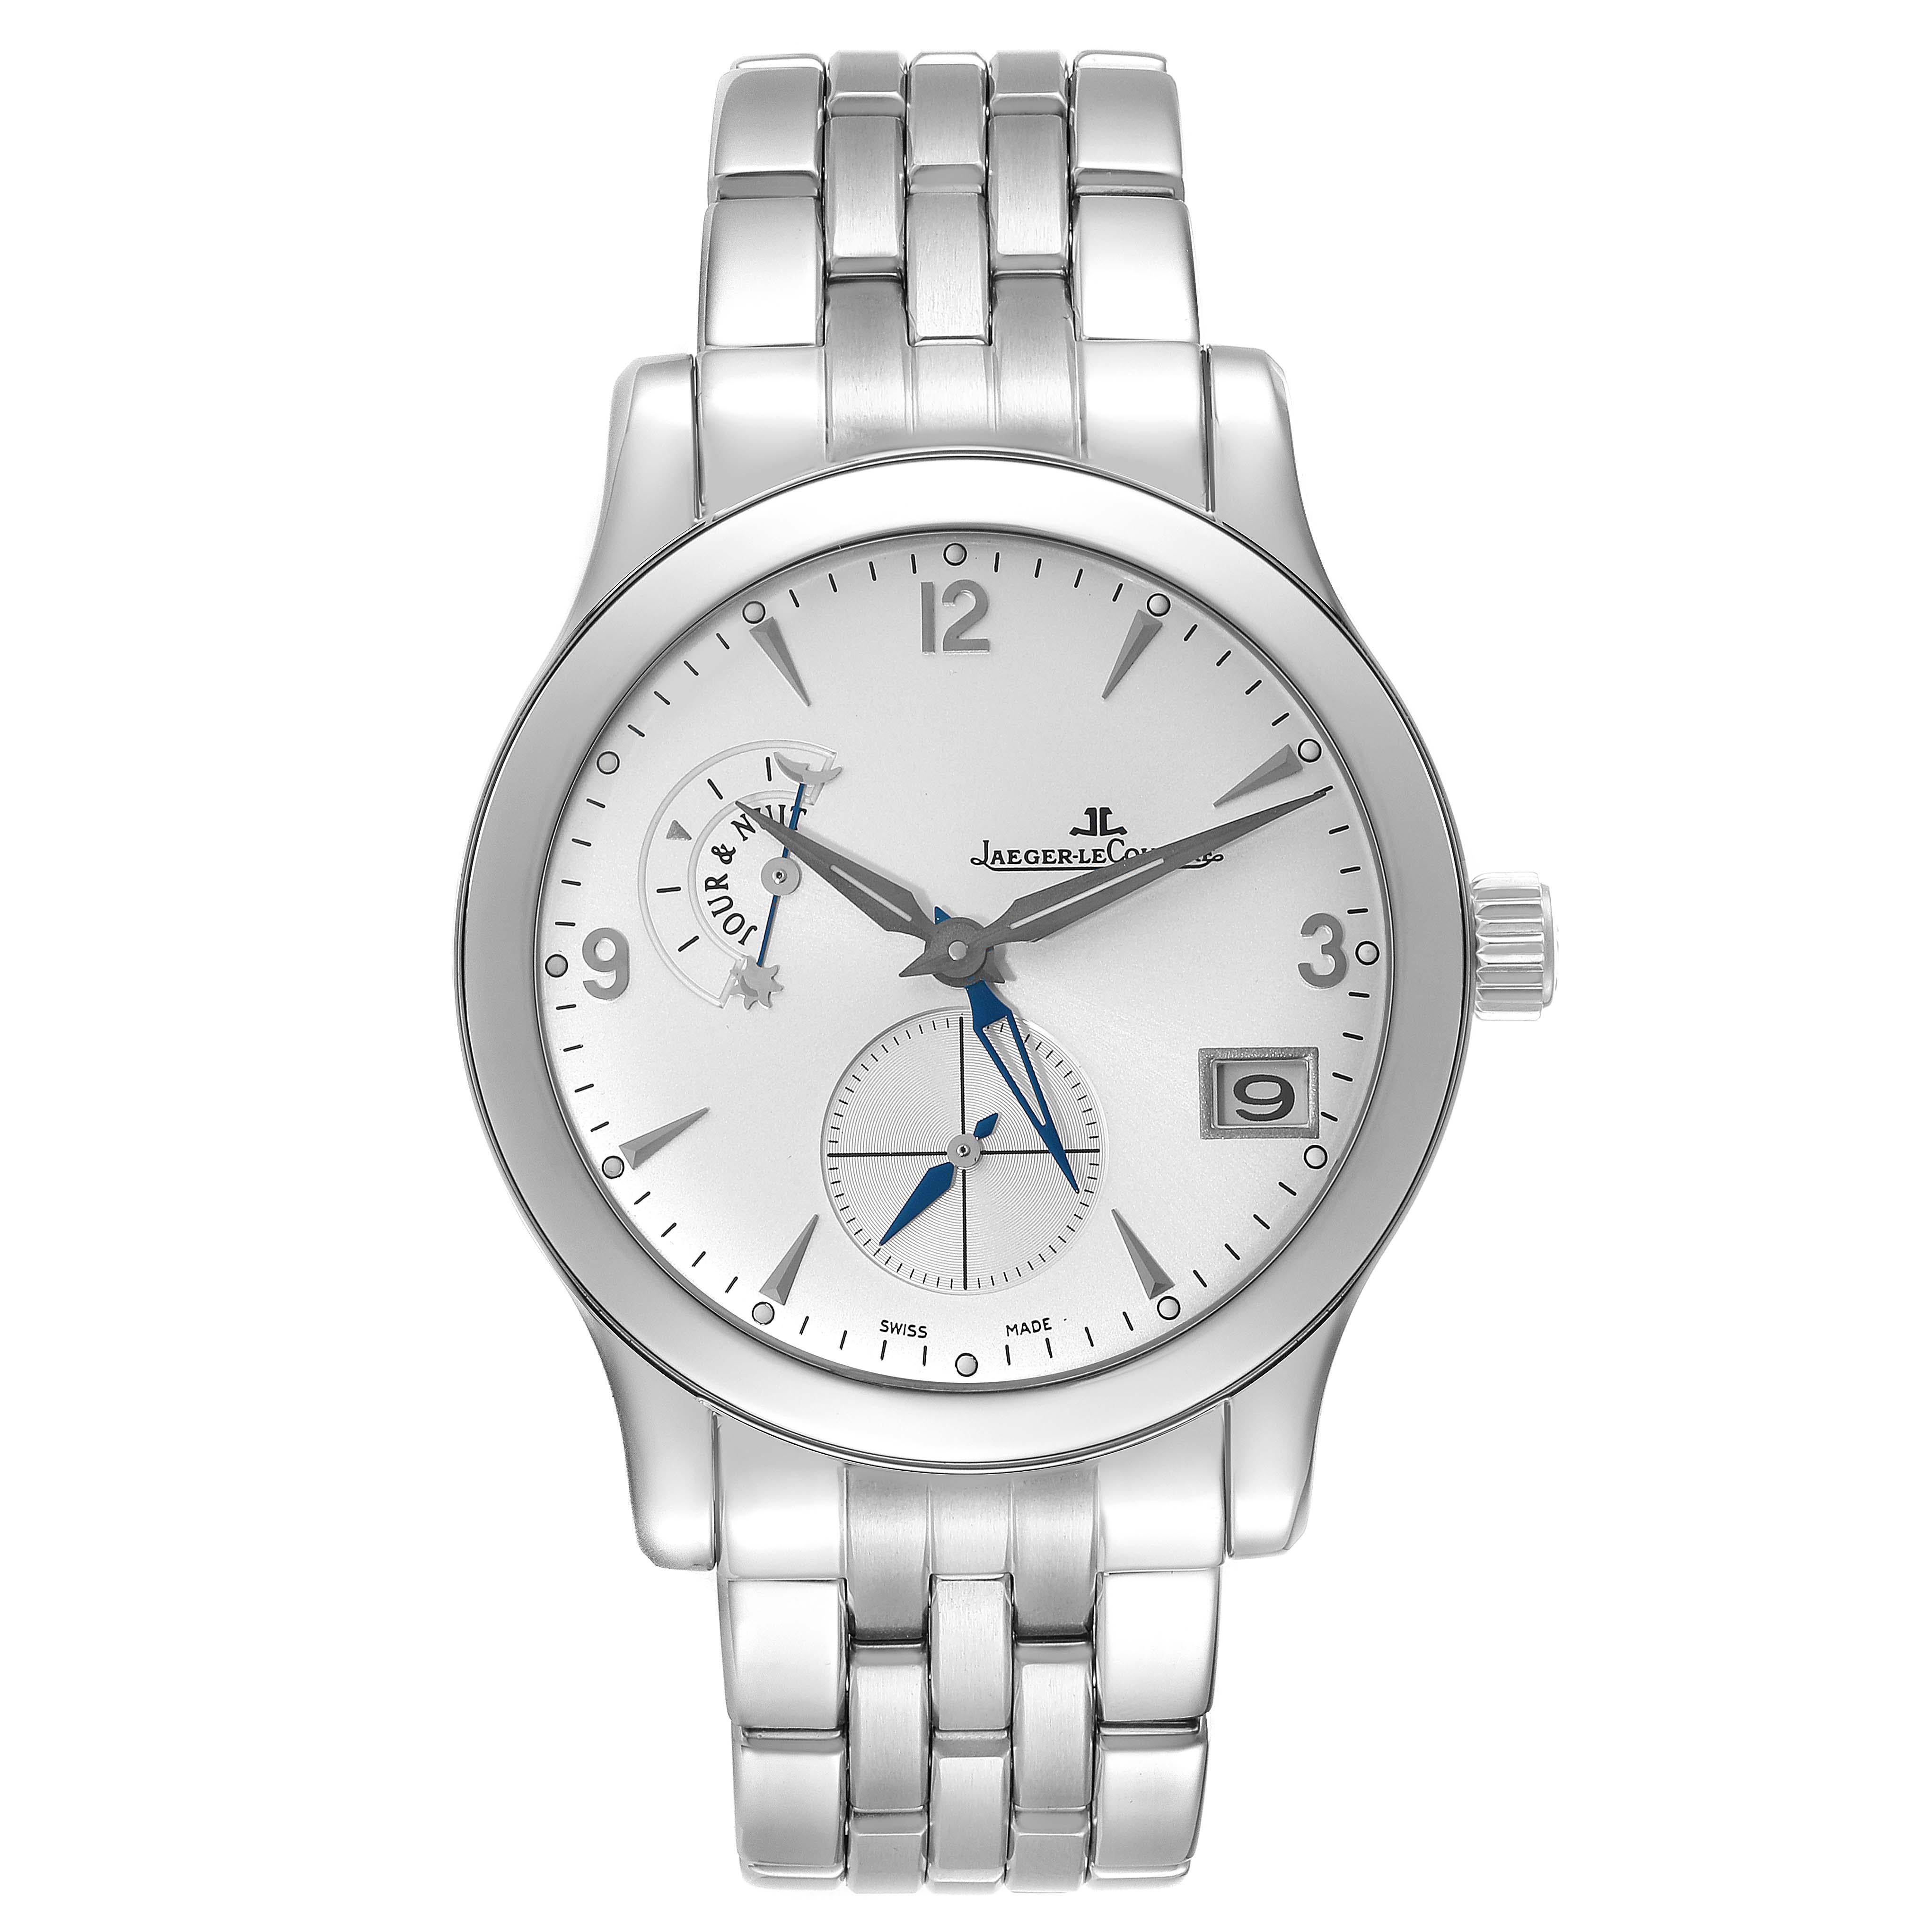 Jaeger LeCoultre Master Control Hometime Steel Mens Watch 147.8.05.S Q1628420. Self-winding automatic movement. Stainless steel case 40.0 mm in diameter. Transparent exhibition sapphire crystal case back. Concave lugs. Stainless steel smooth bezel.